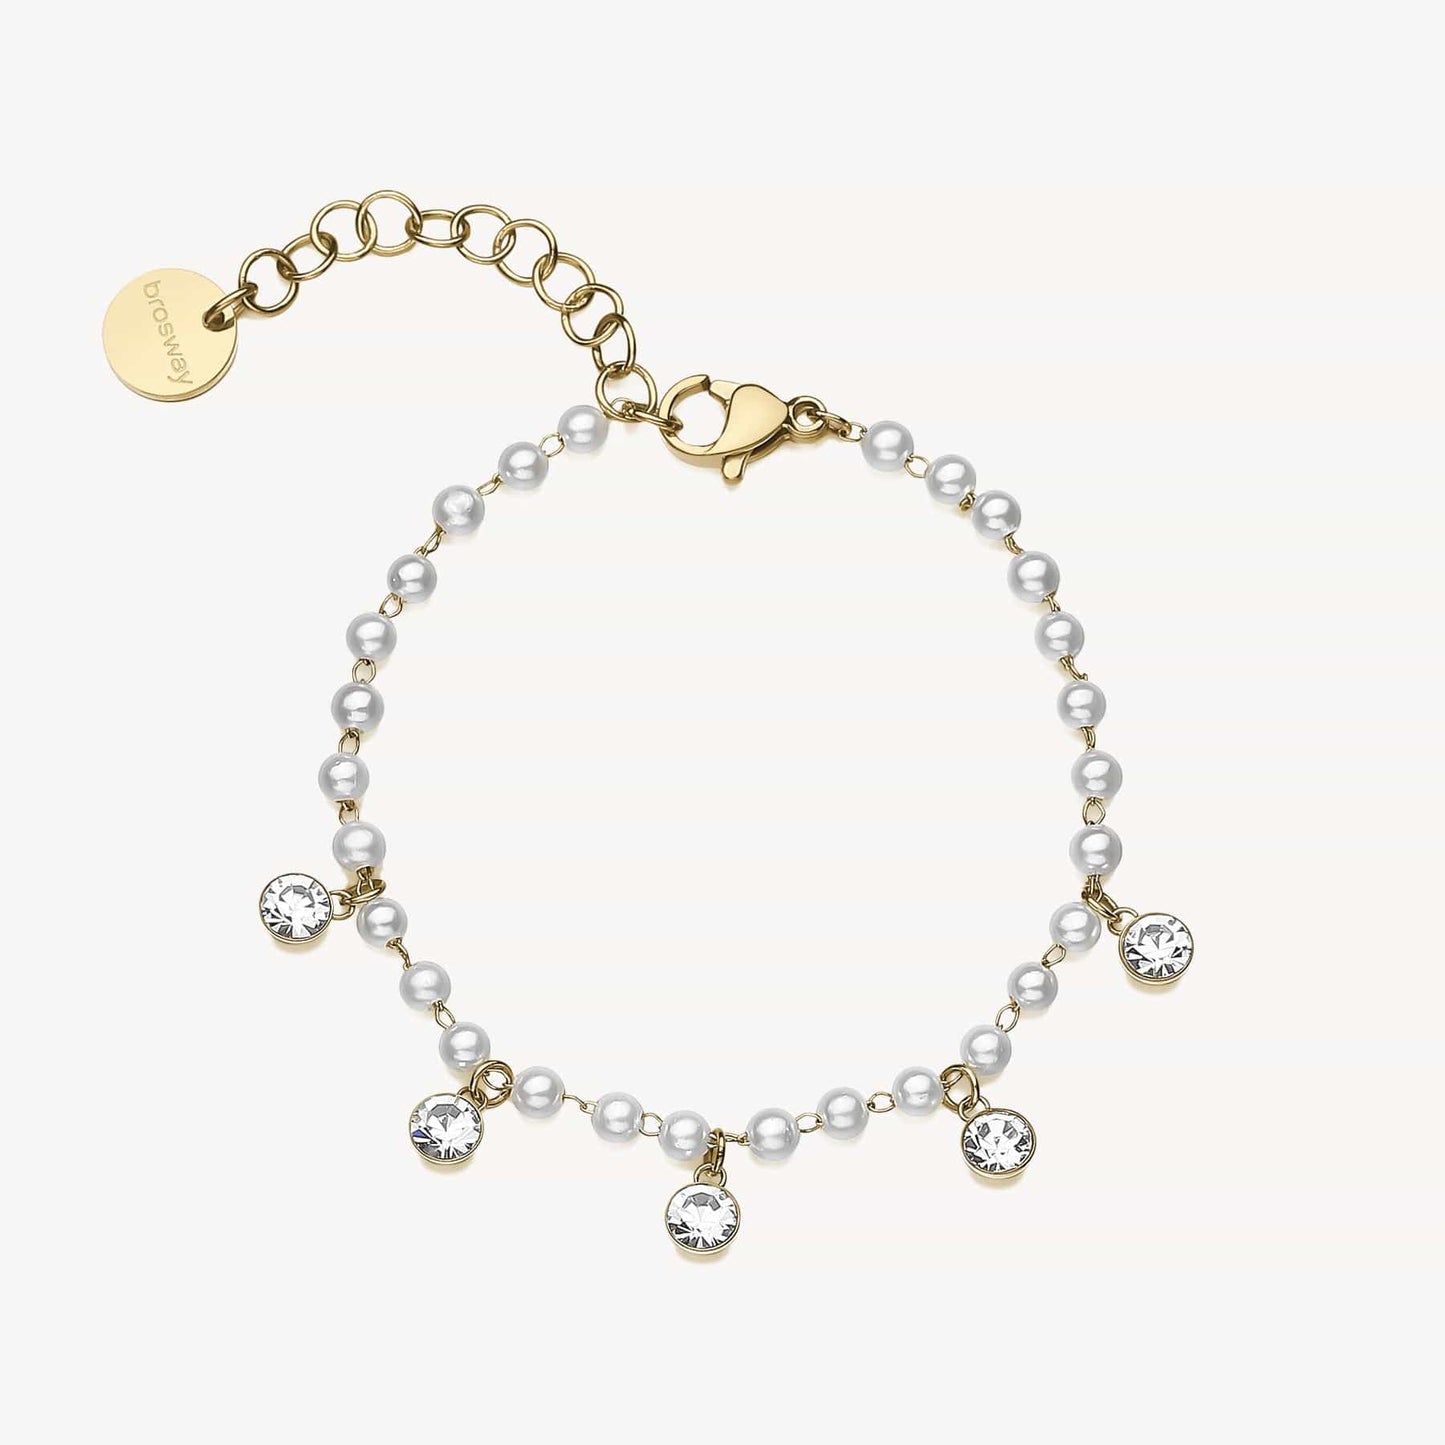 BRC-SS Stainless Steel Gold Tone Bracelet with Crystals & Shell-Pearls